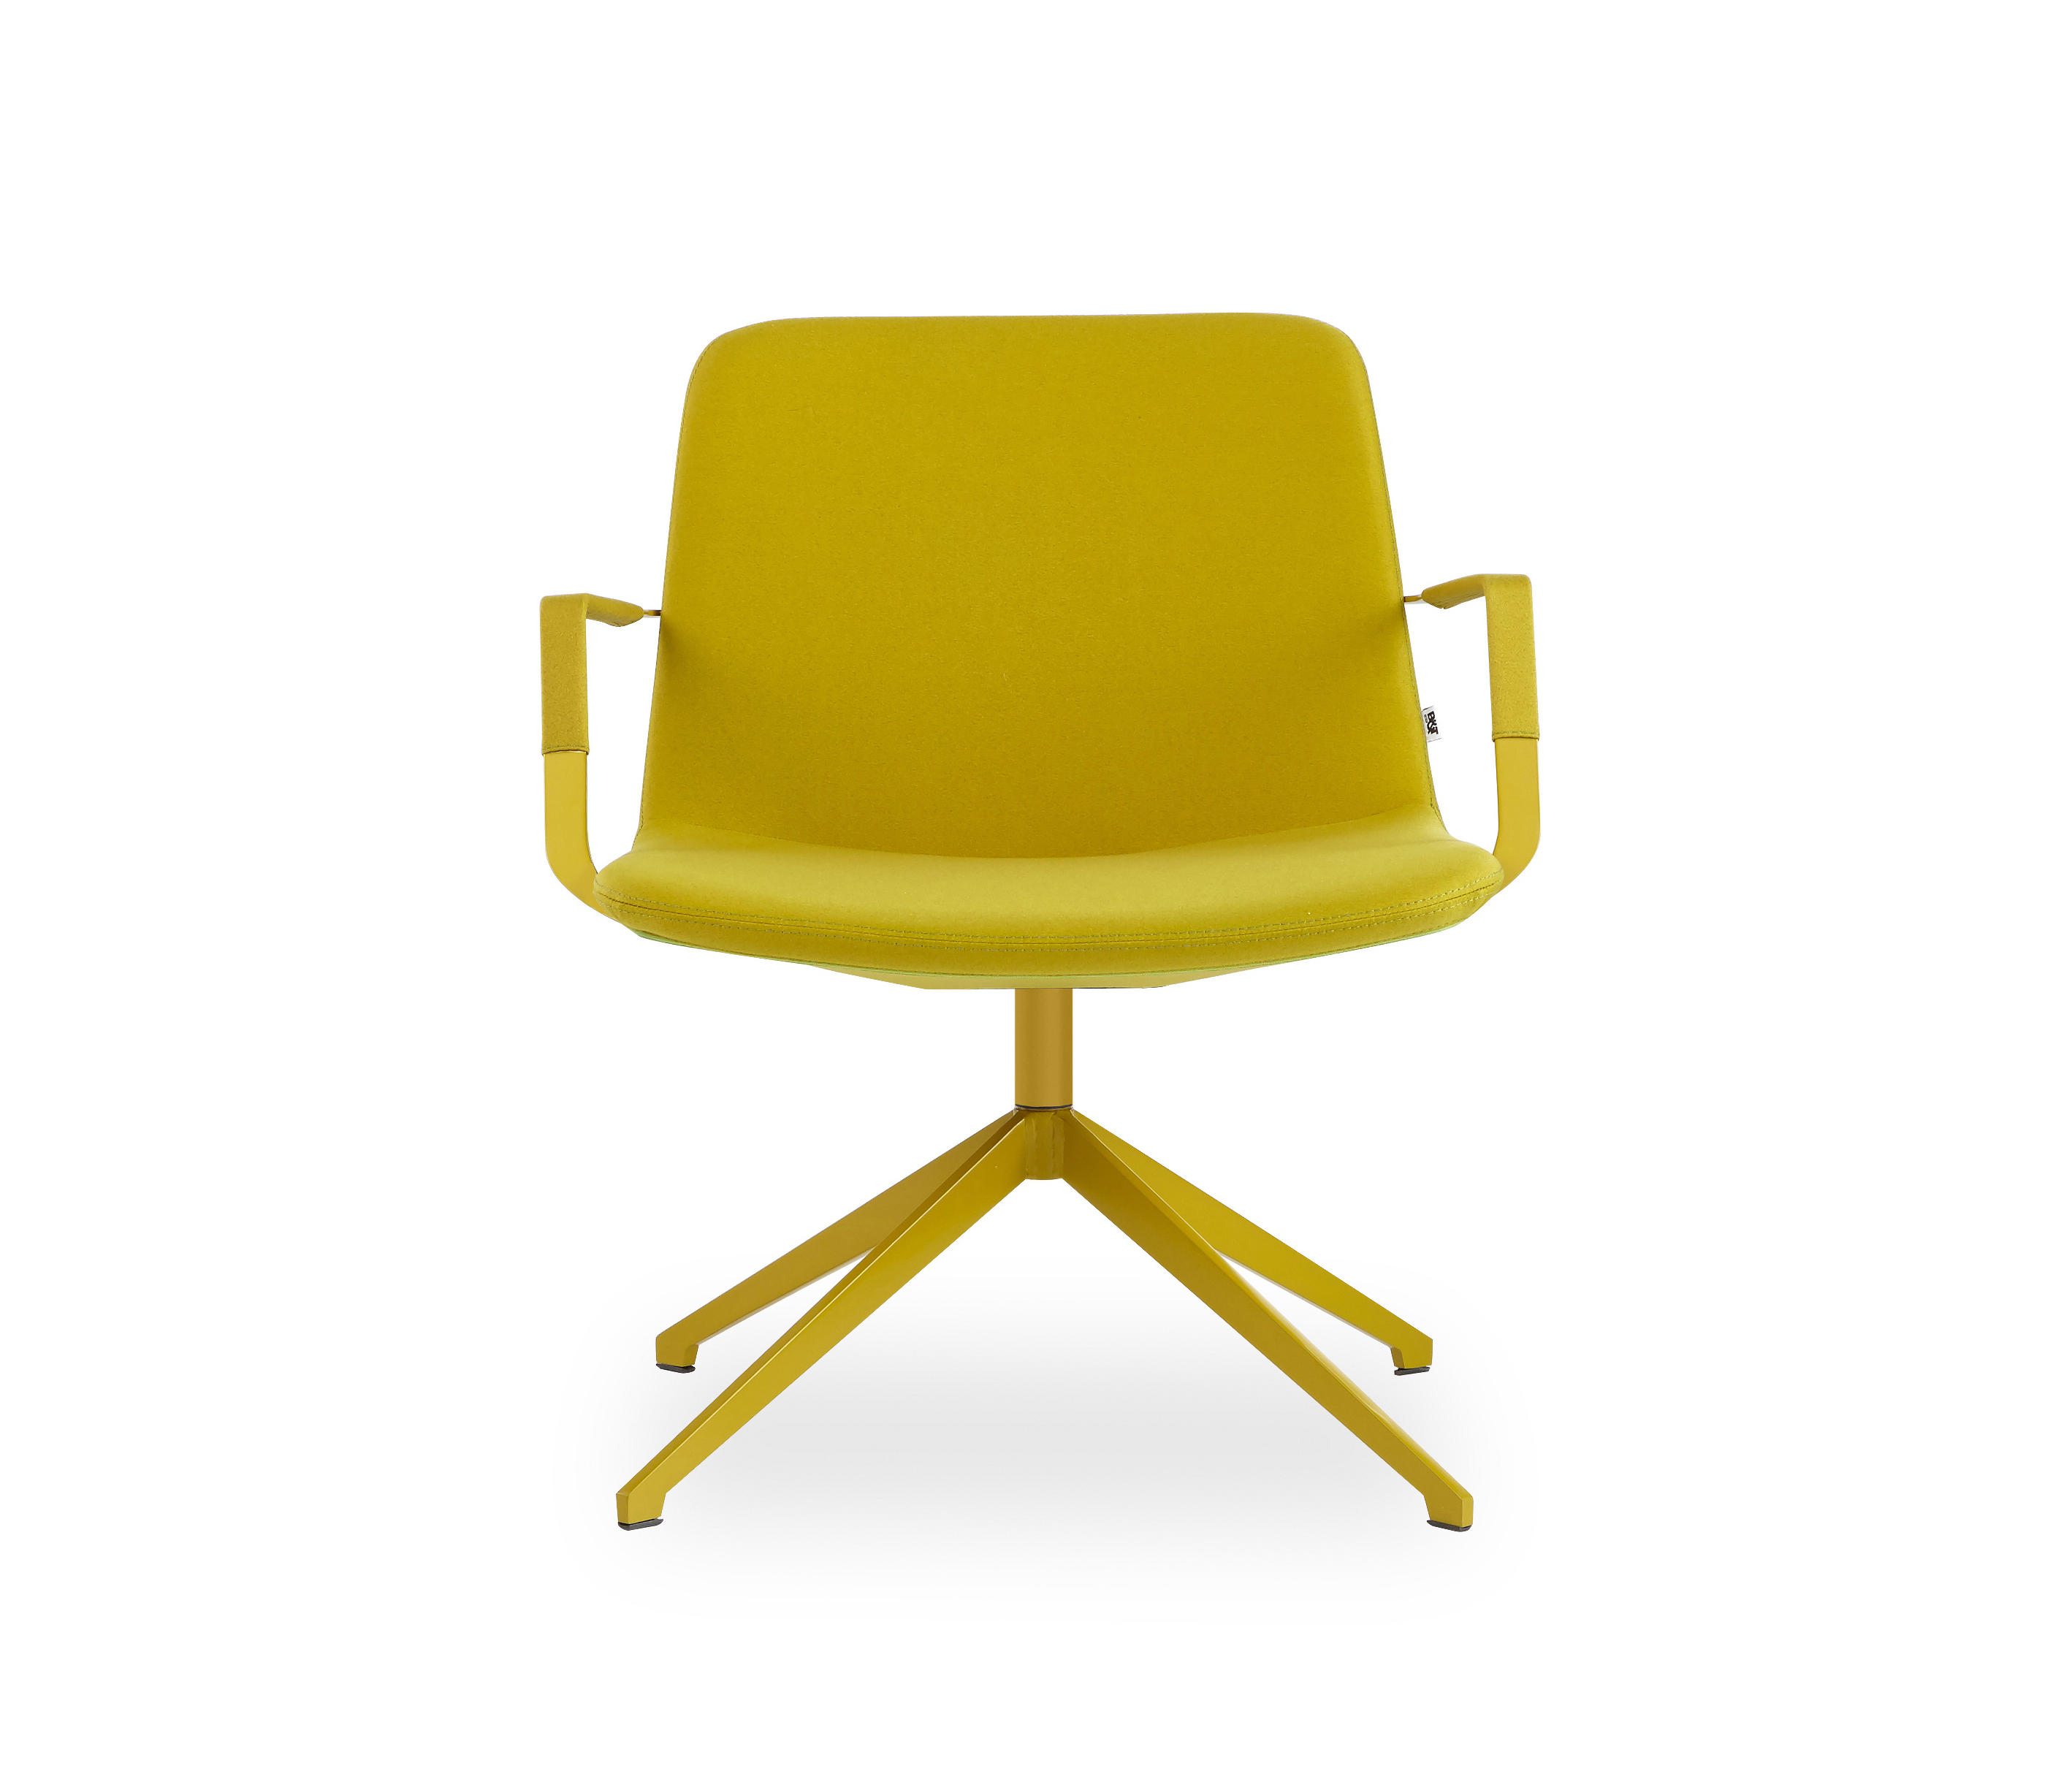 PERA Lounge Chair by B&T Design